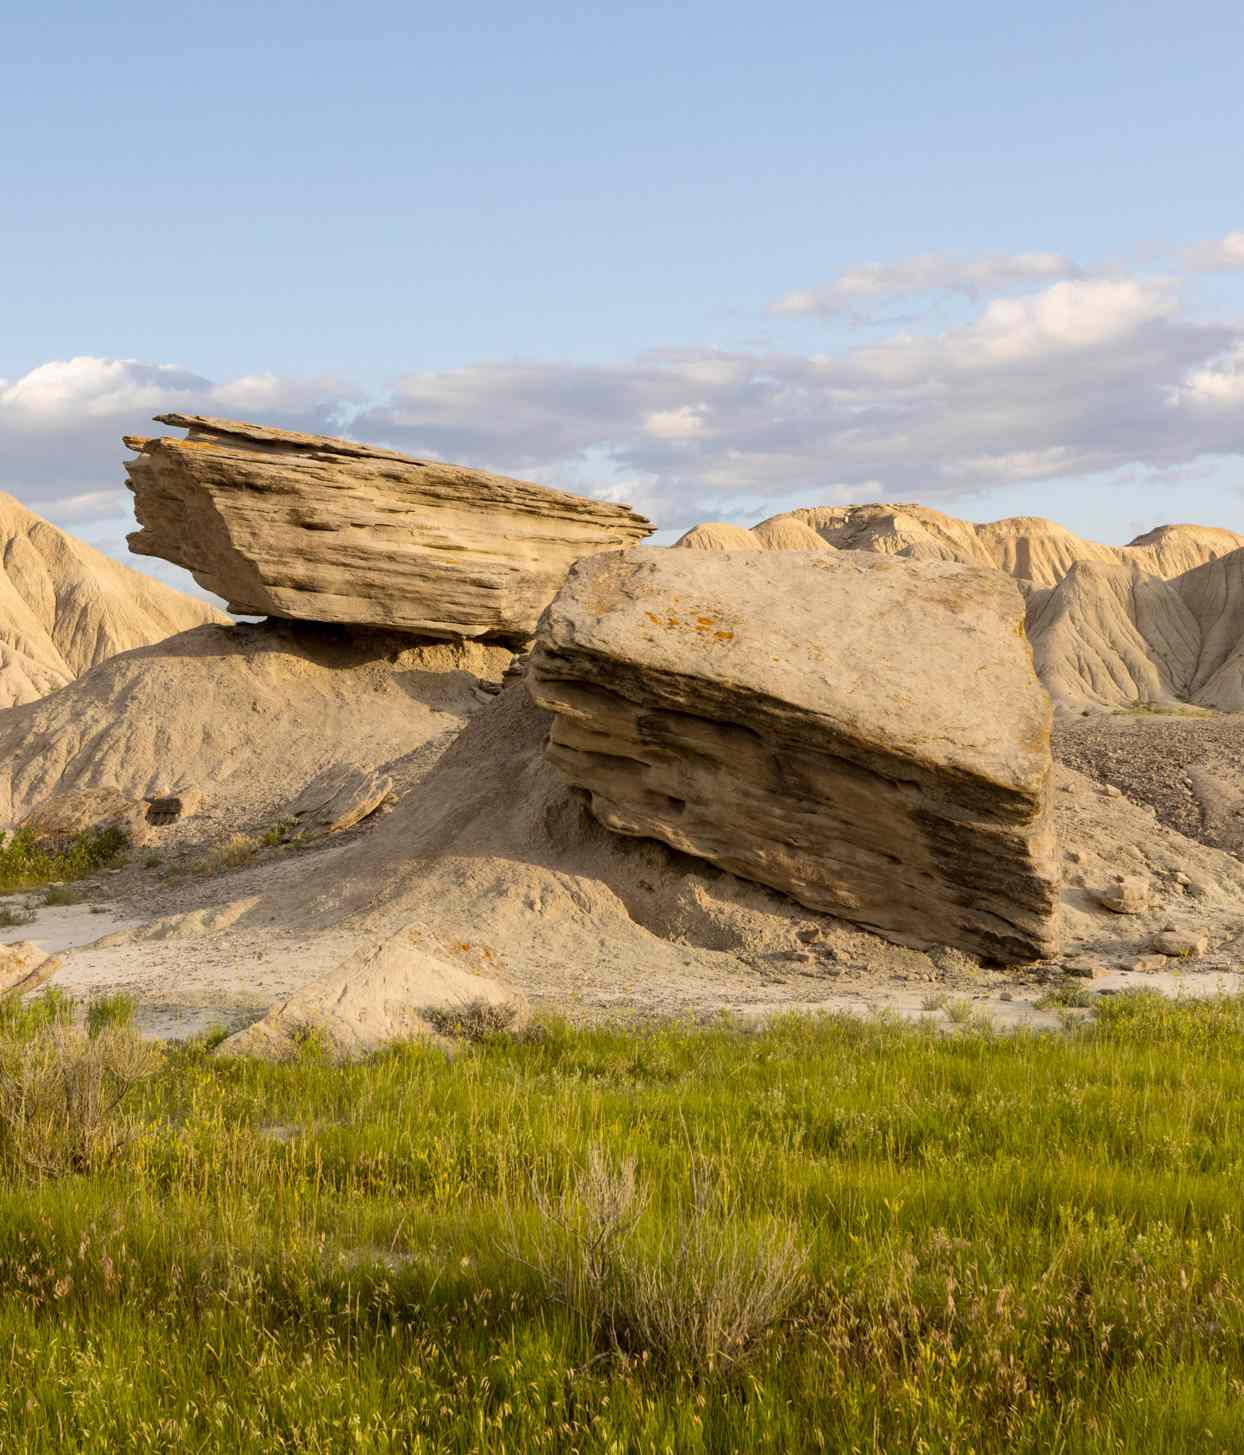 Unusual formations of large, hard rocks balanced on eroding softer material give Toadstool Geologic Park its name.